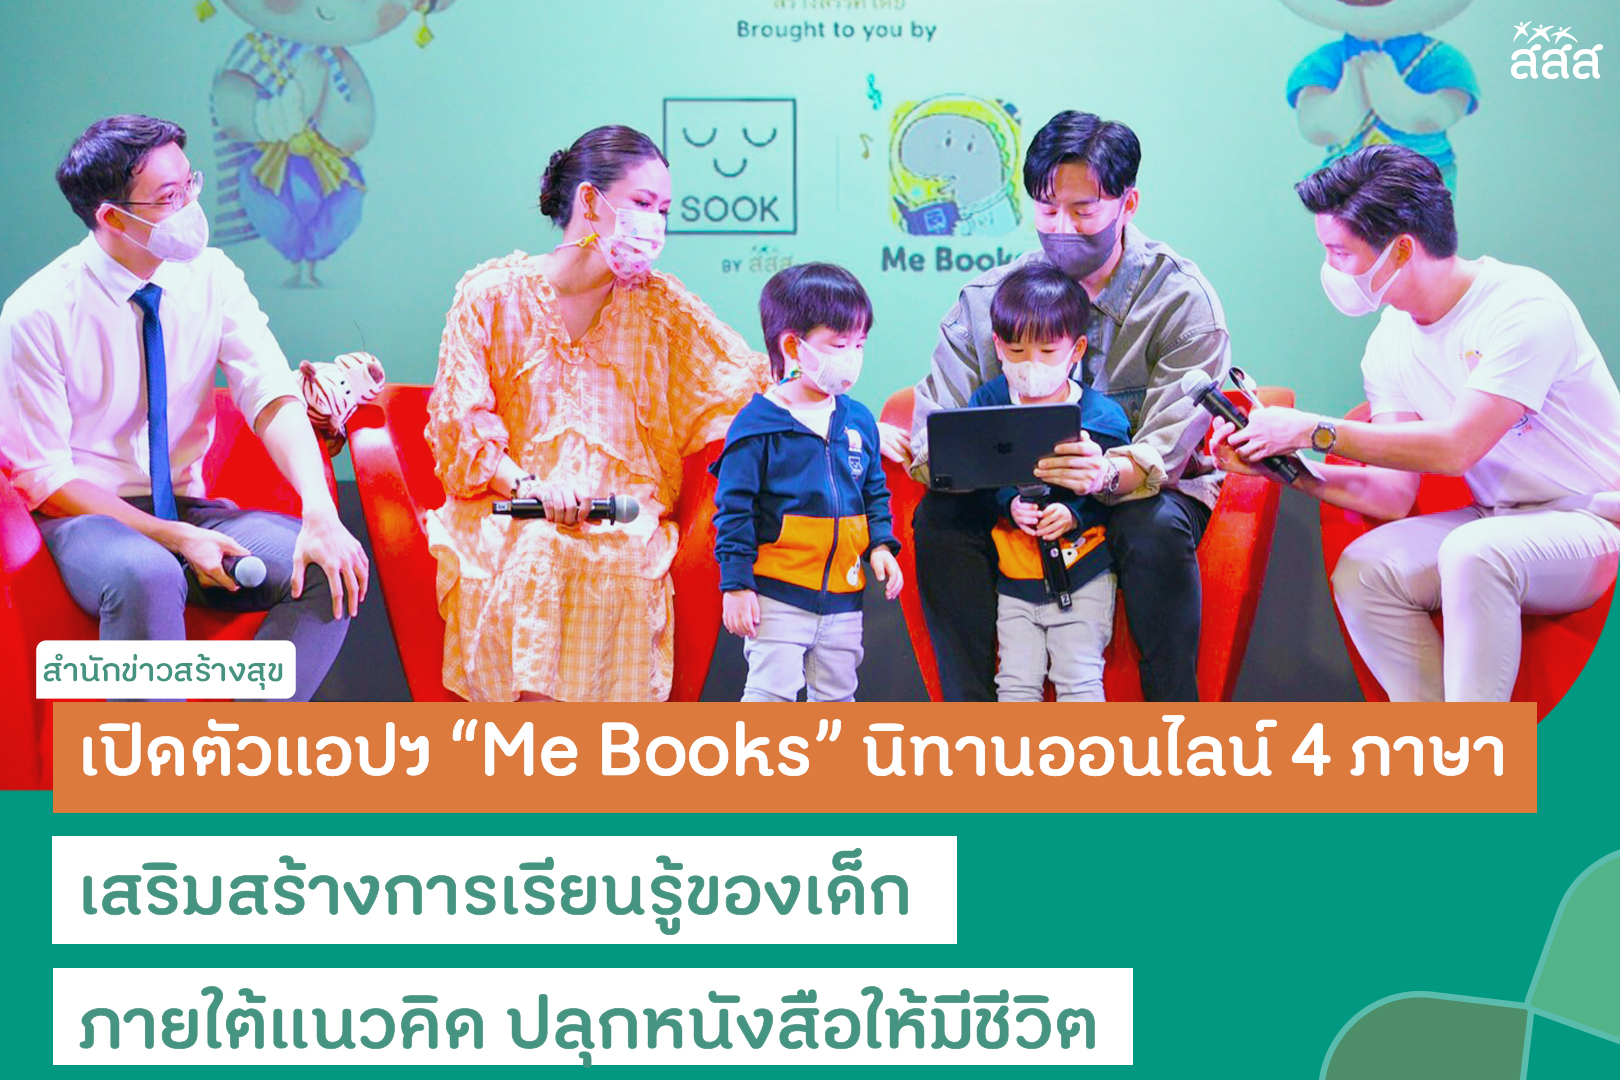 Quadrilingual Living Storybook mobile app “Me Books” to enhance children’s learning experience thaihealth